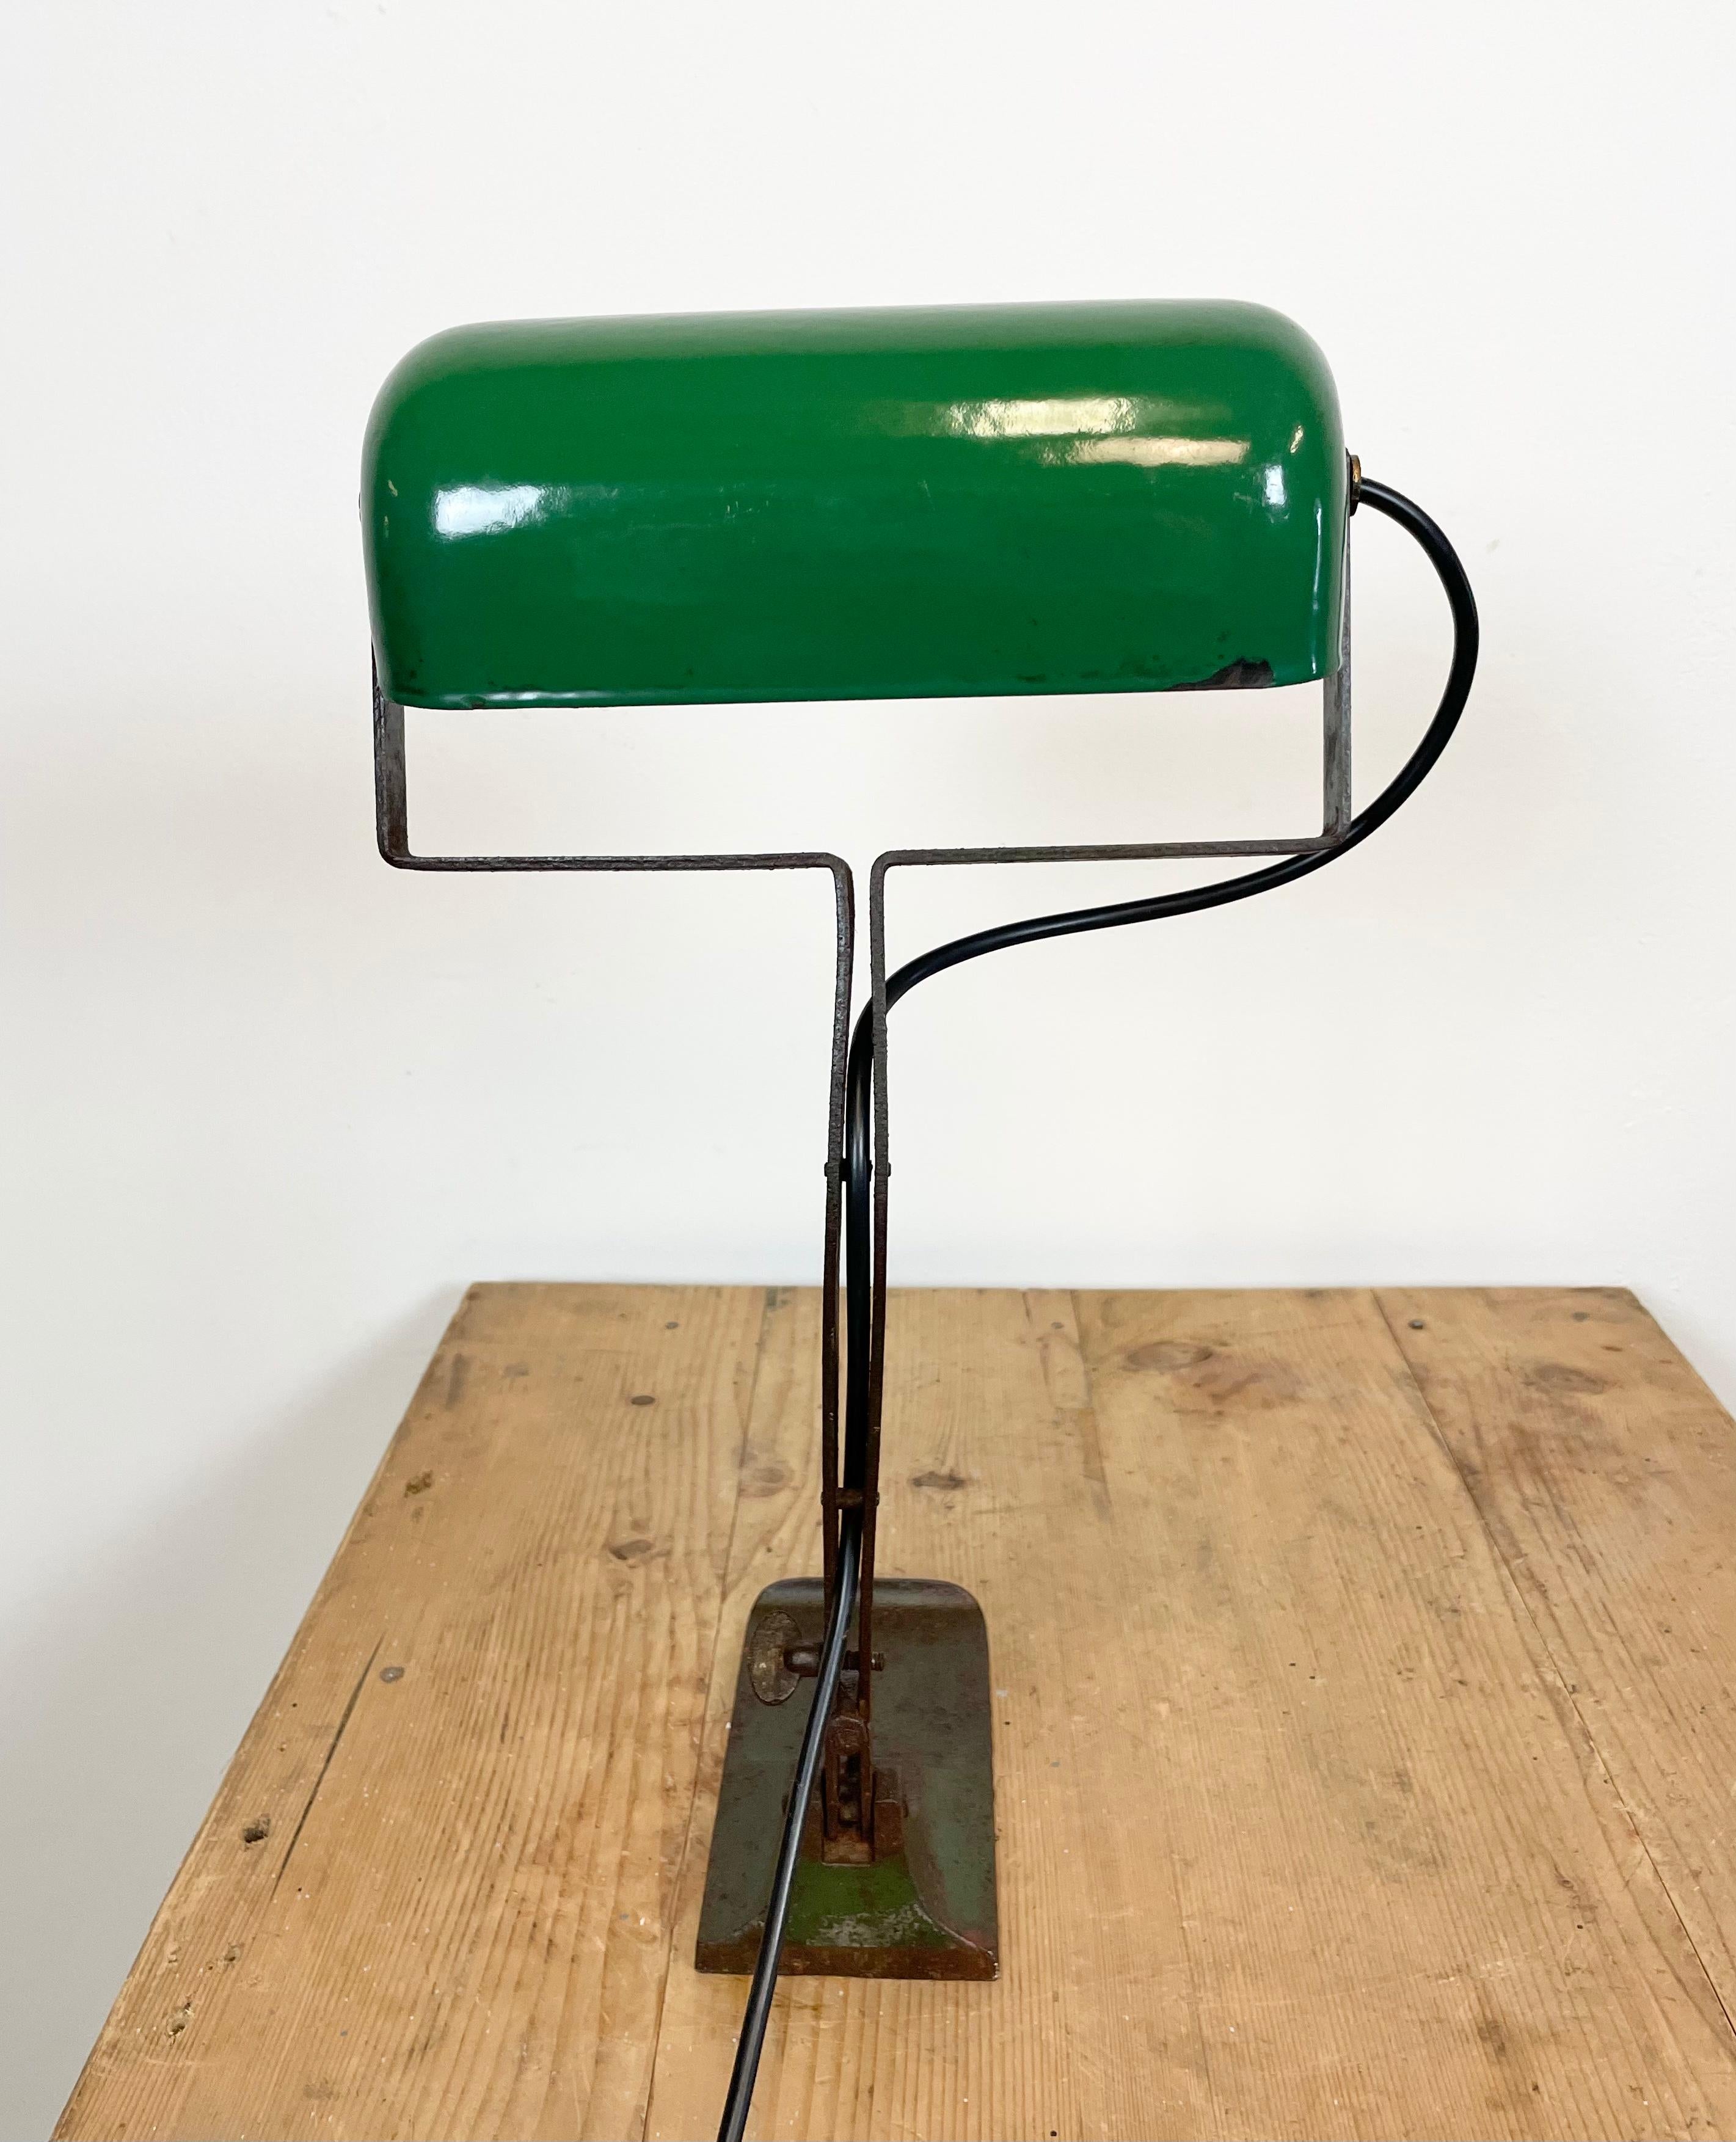 Iron Vintage Green Enamel Bank Lamp from Astral, 1930s For Sale